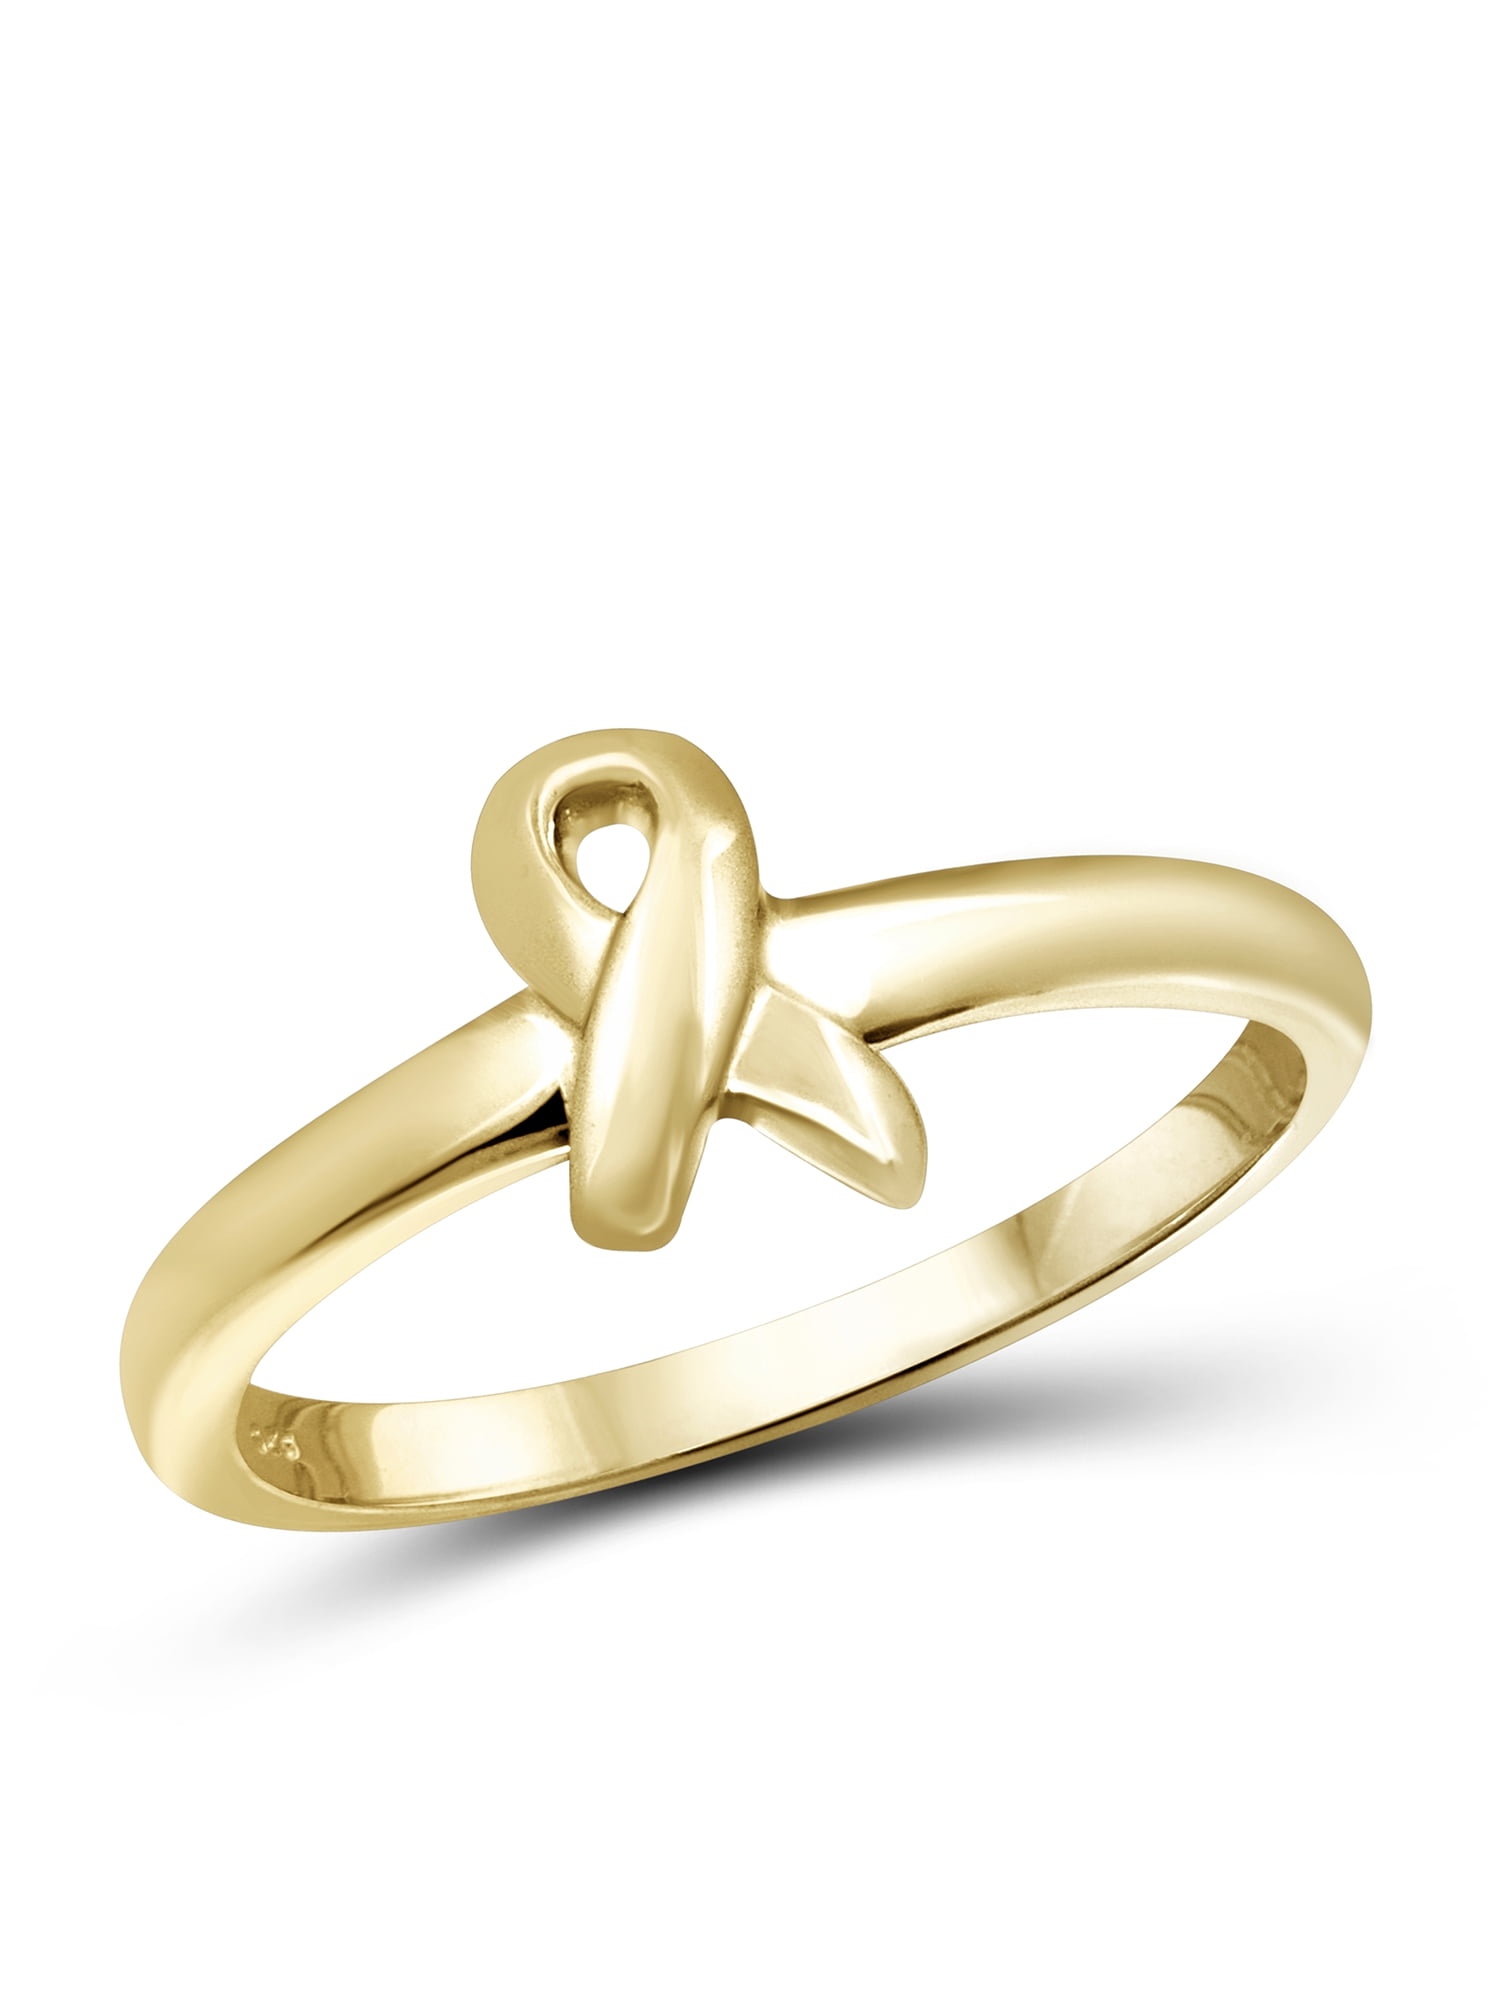 Customized RK Initial Gold Couple Bands